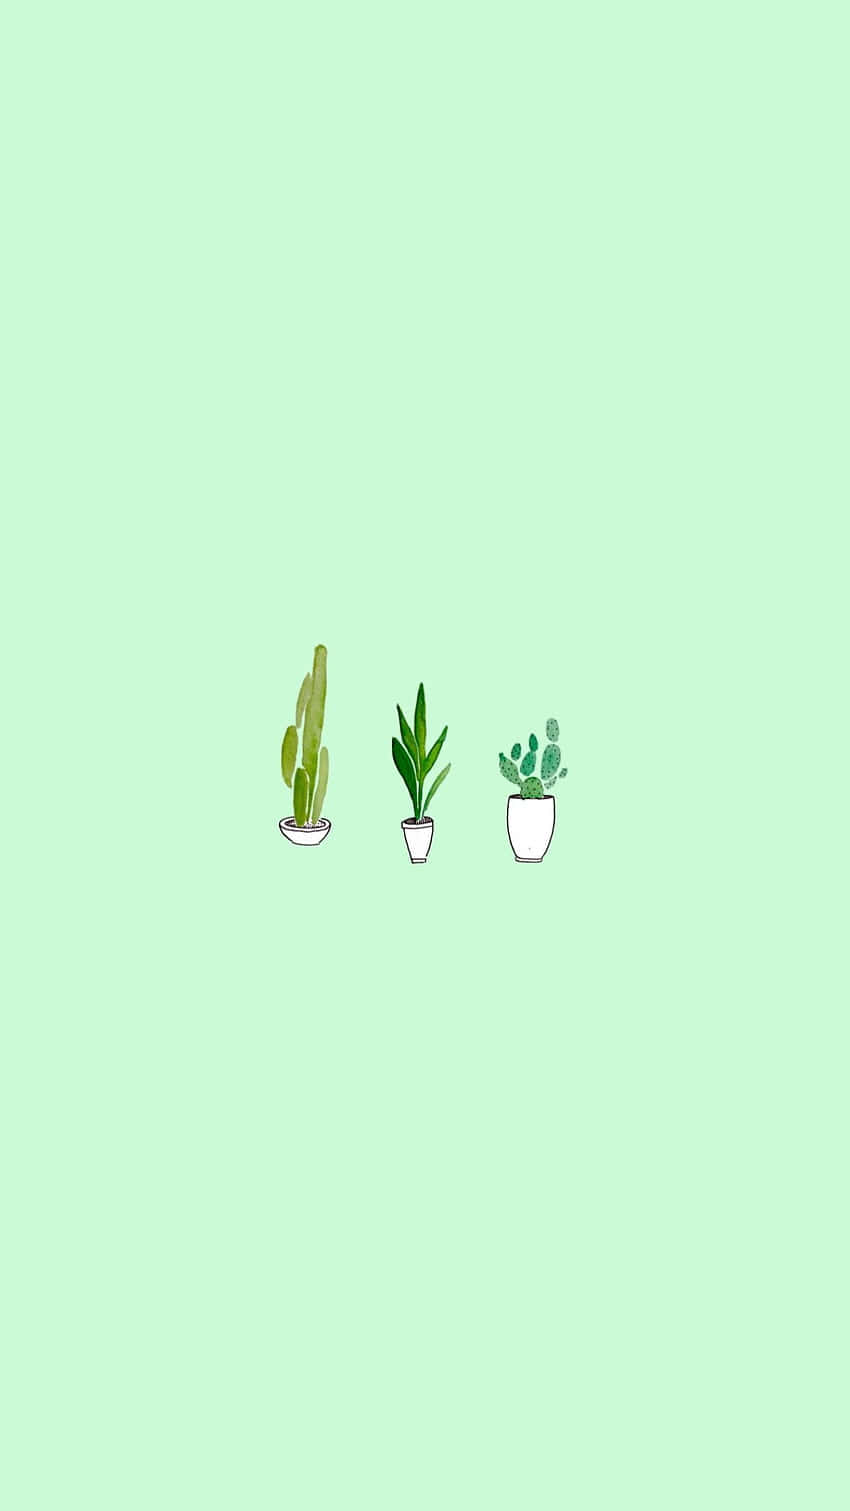 Cute Sage Green Cactus And Two House Plants